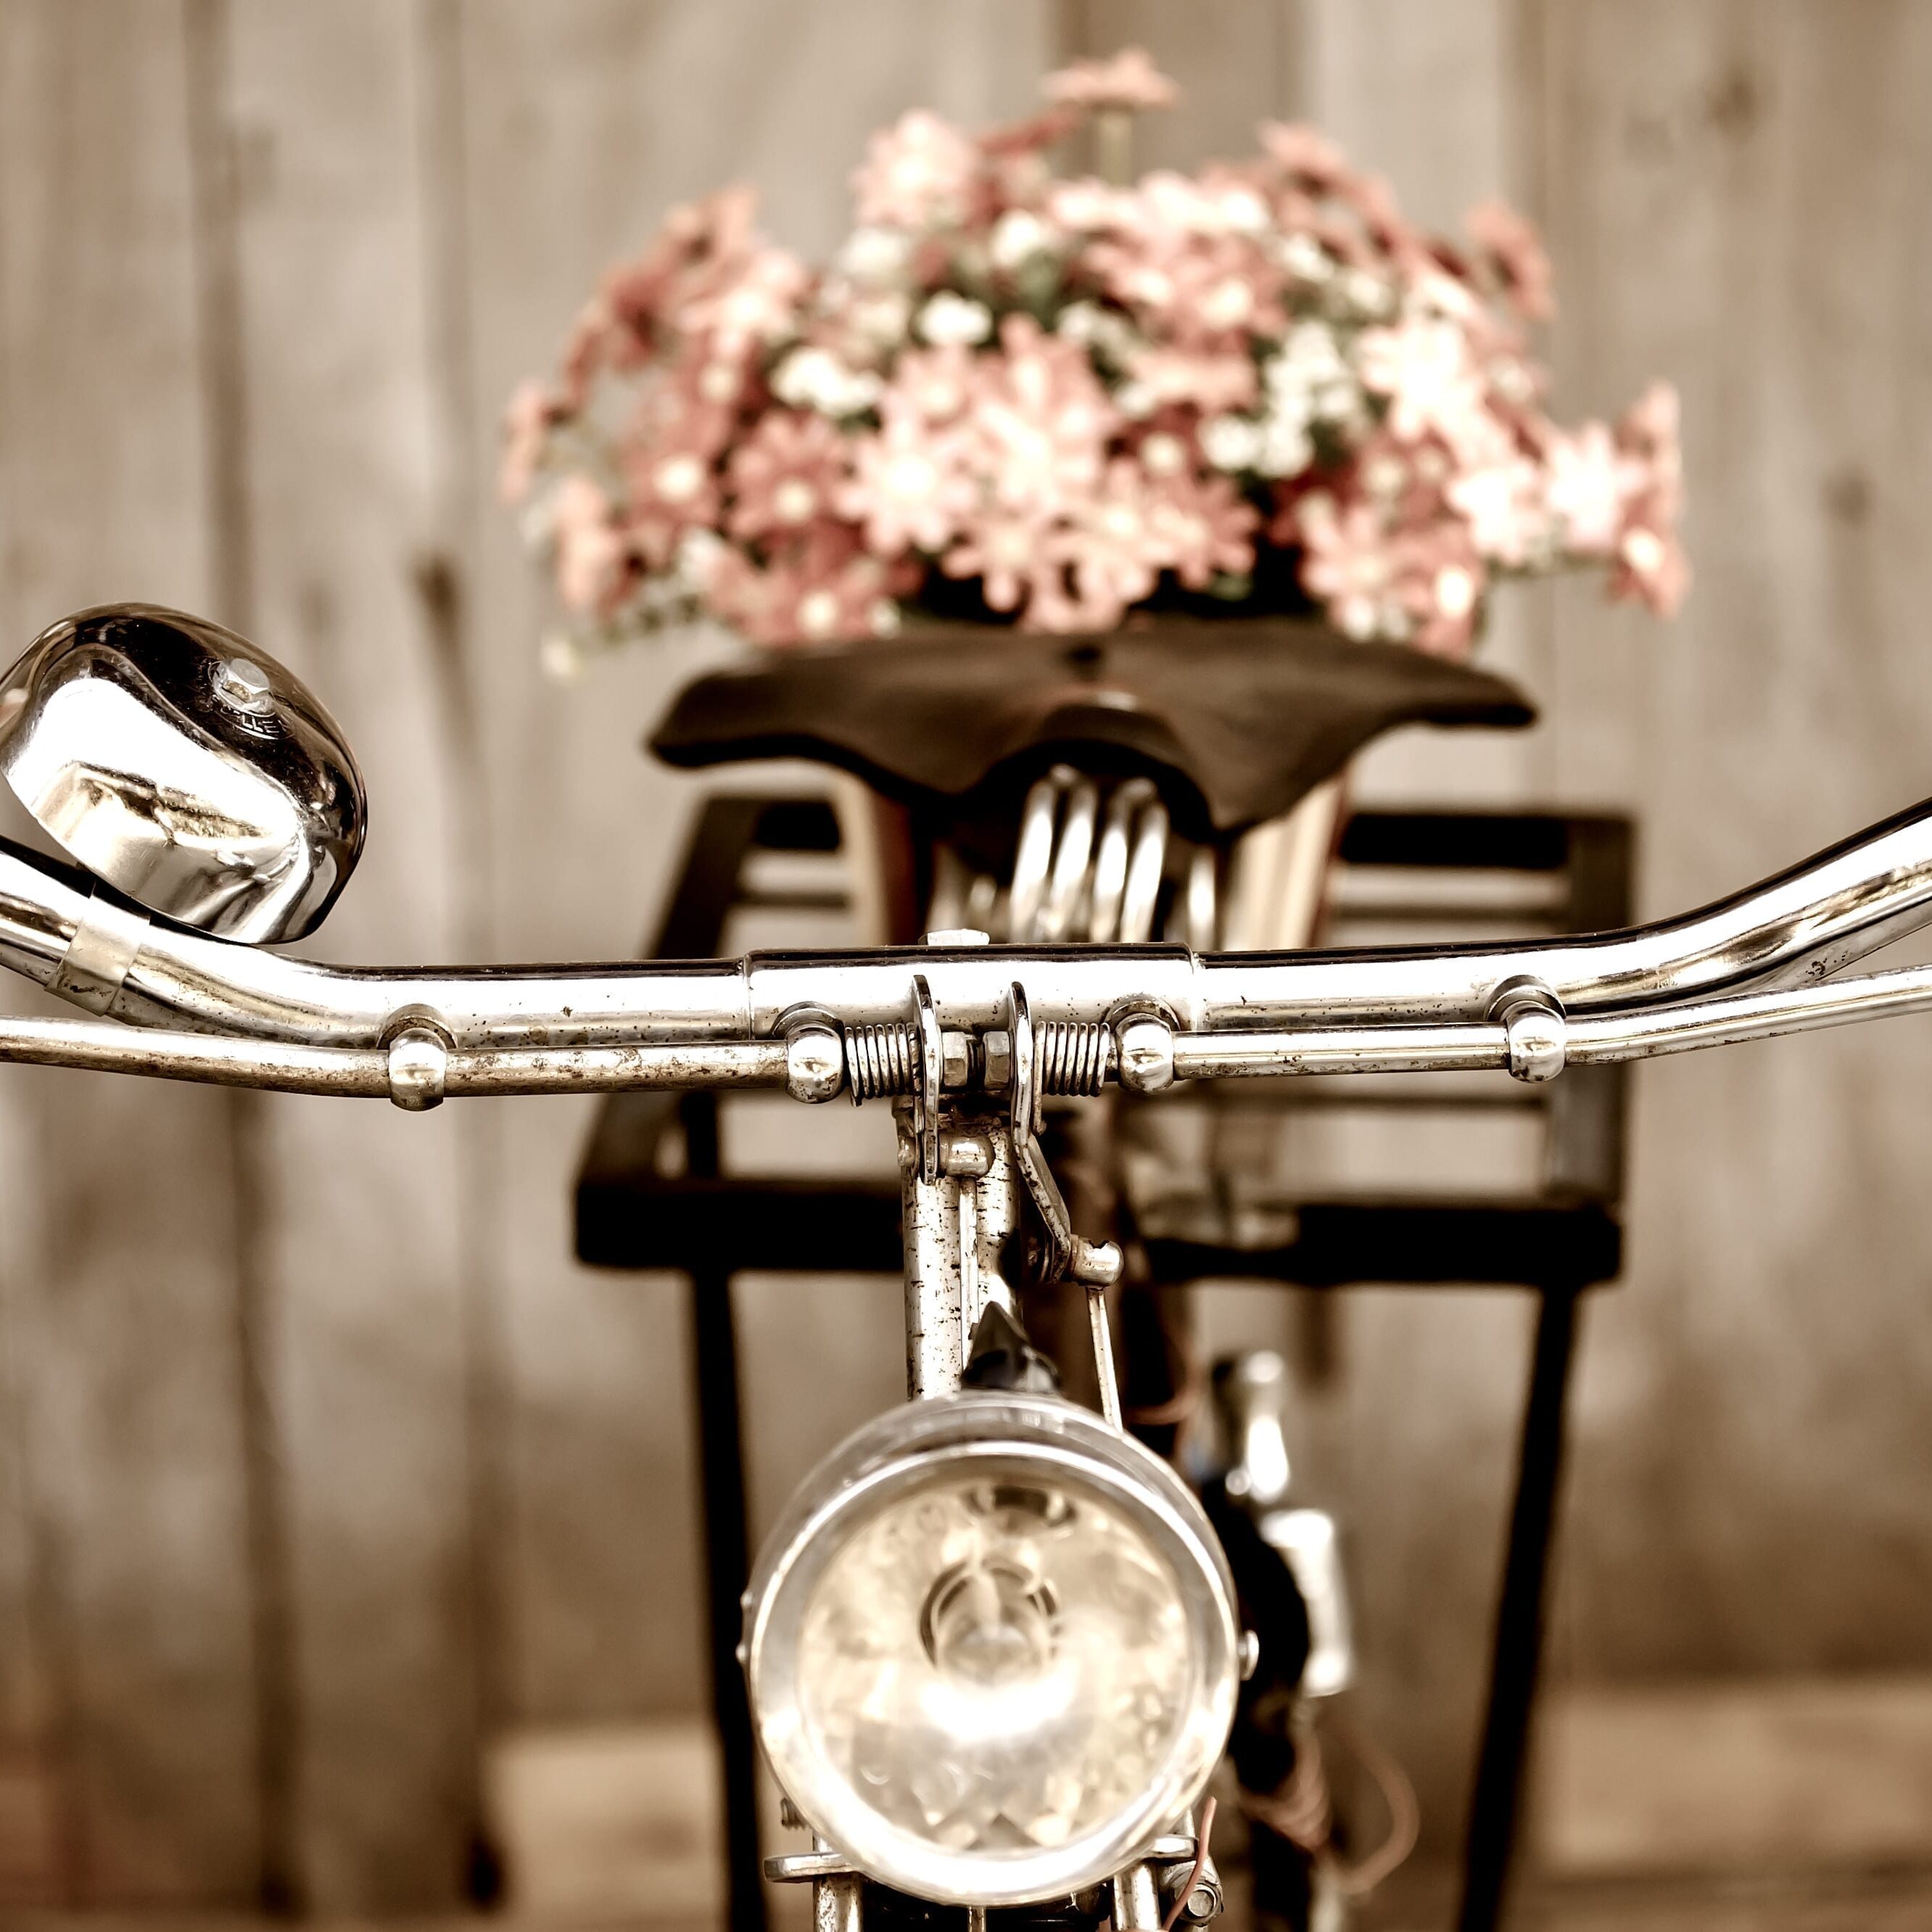 Old bicycle and flower  vase